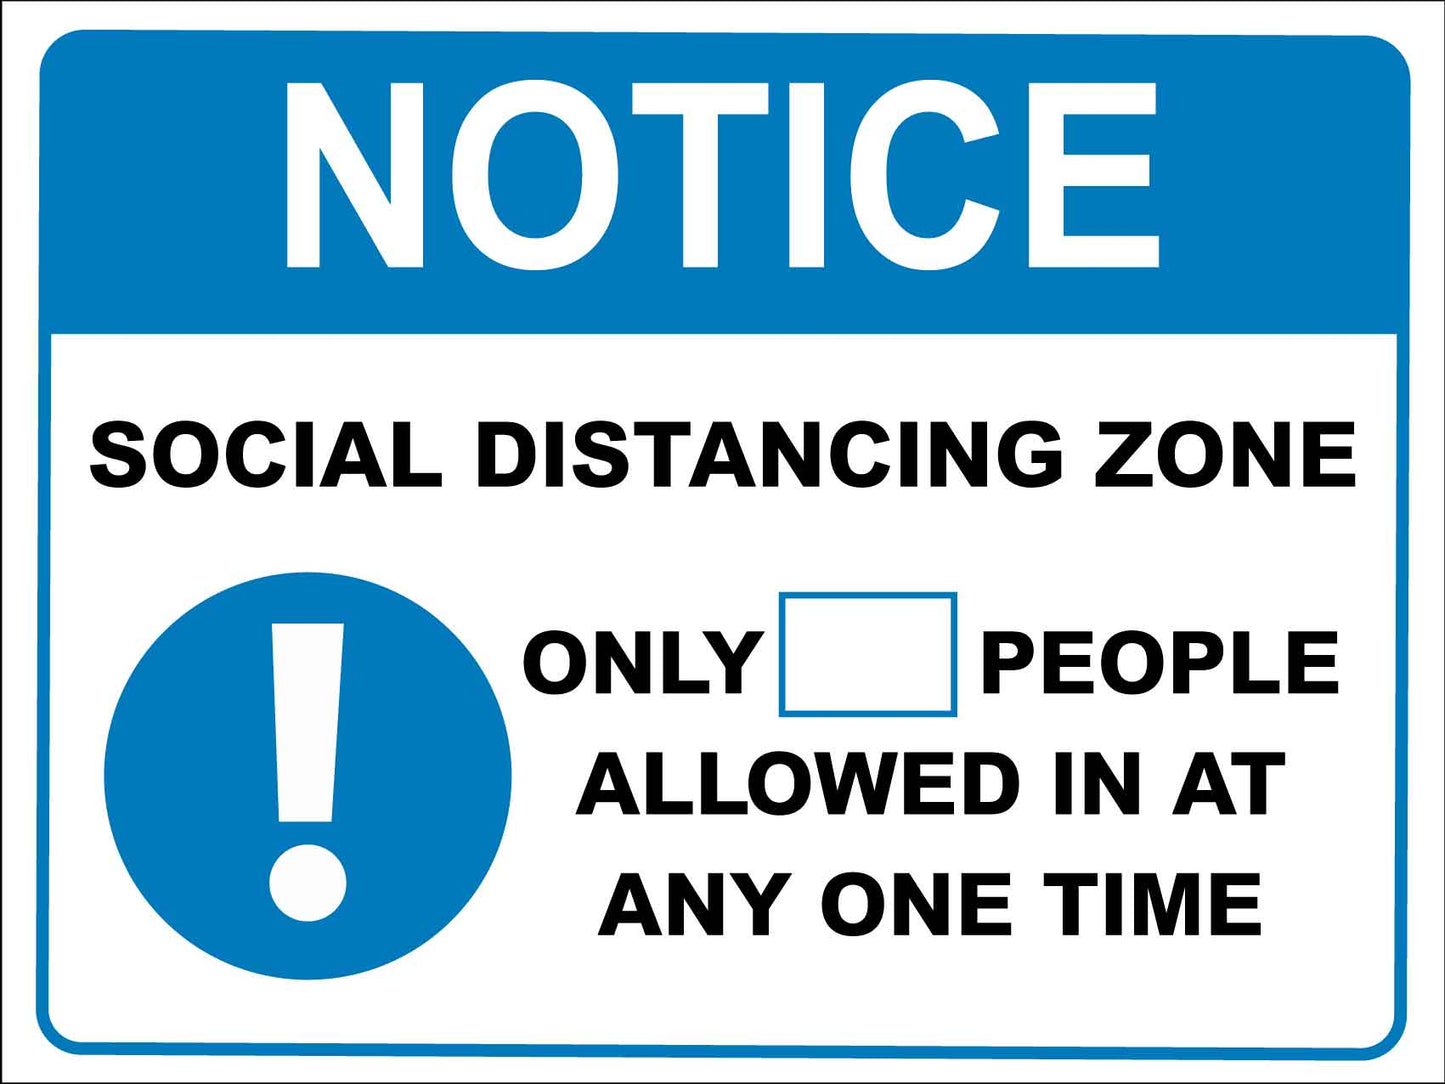 Notice Social Distancing Zone Limited People at One Time Blue Sign